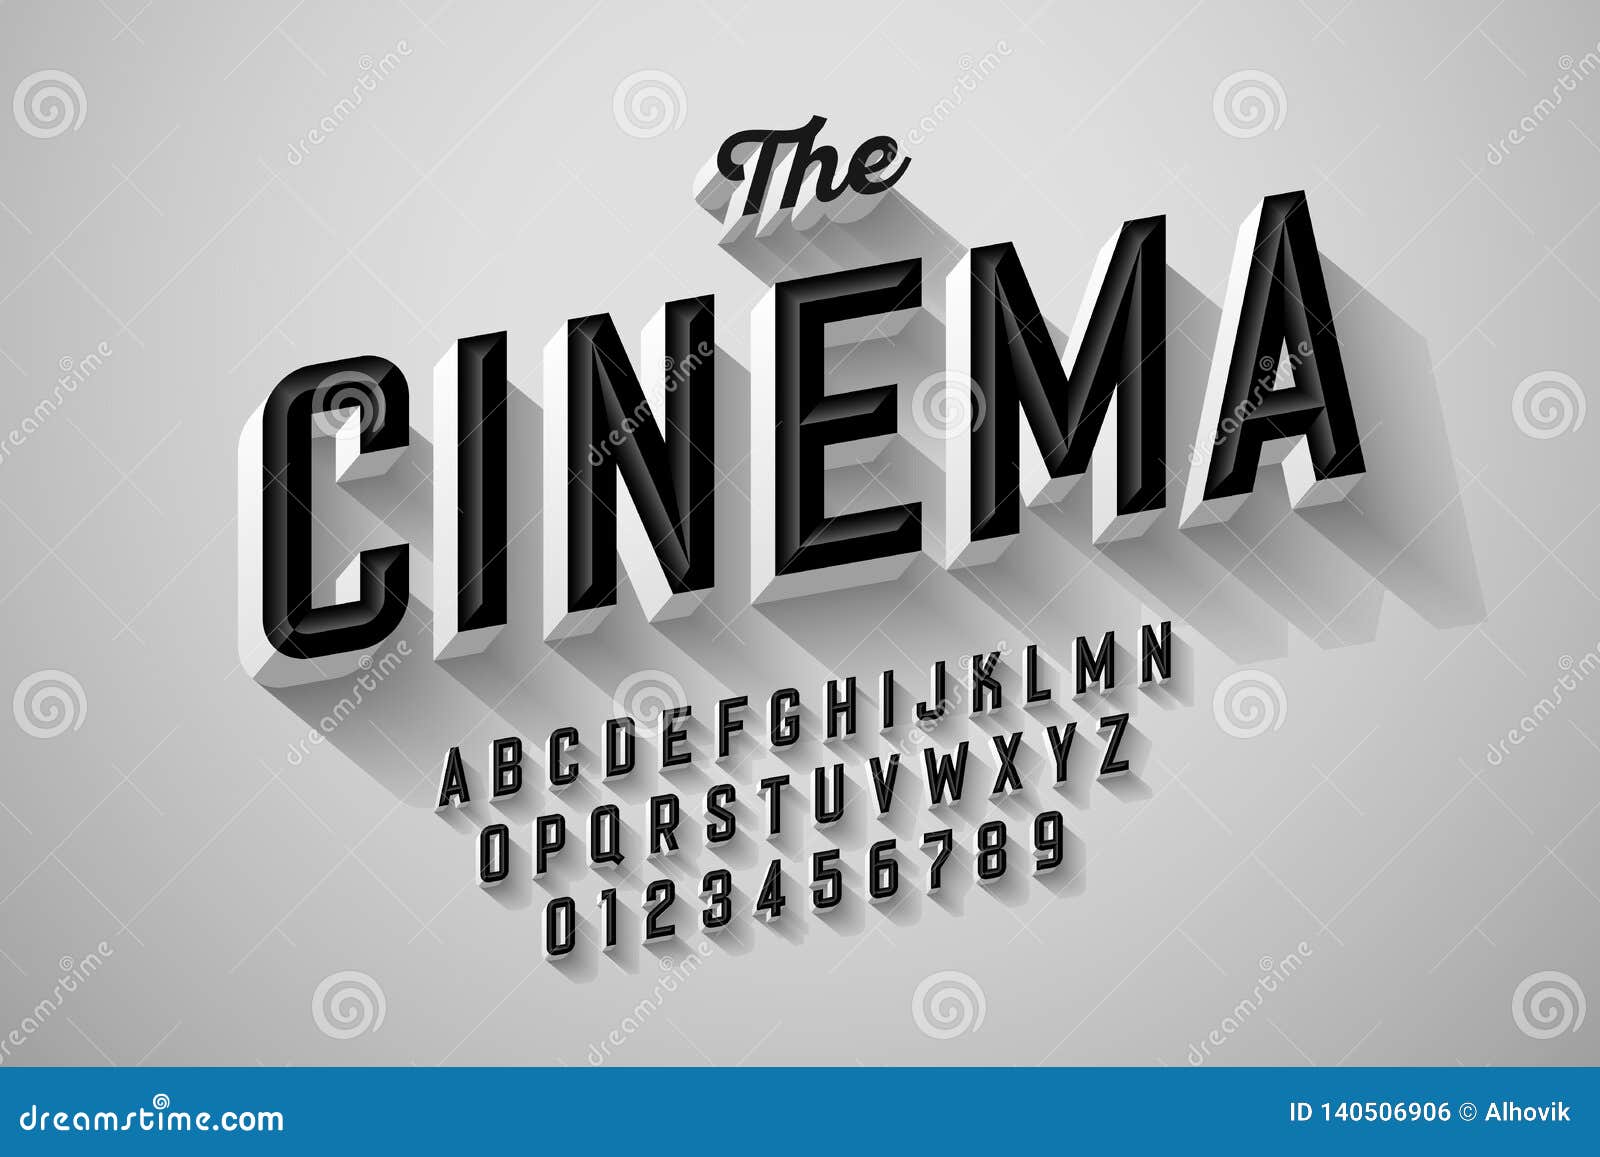 Old Movie Title Vintage Font Stock Vector - Illustration of shadow